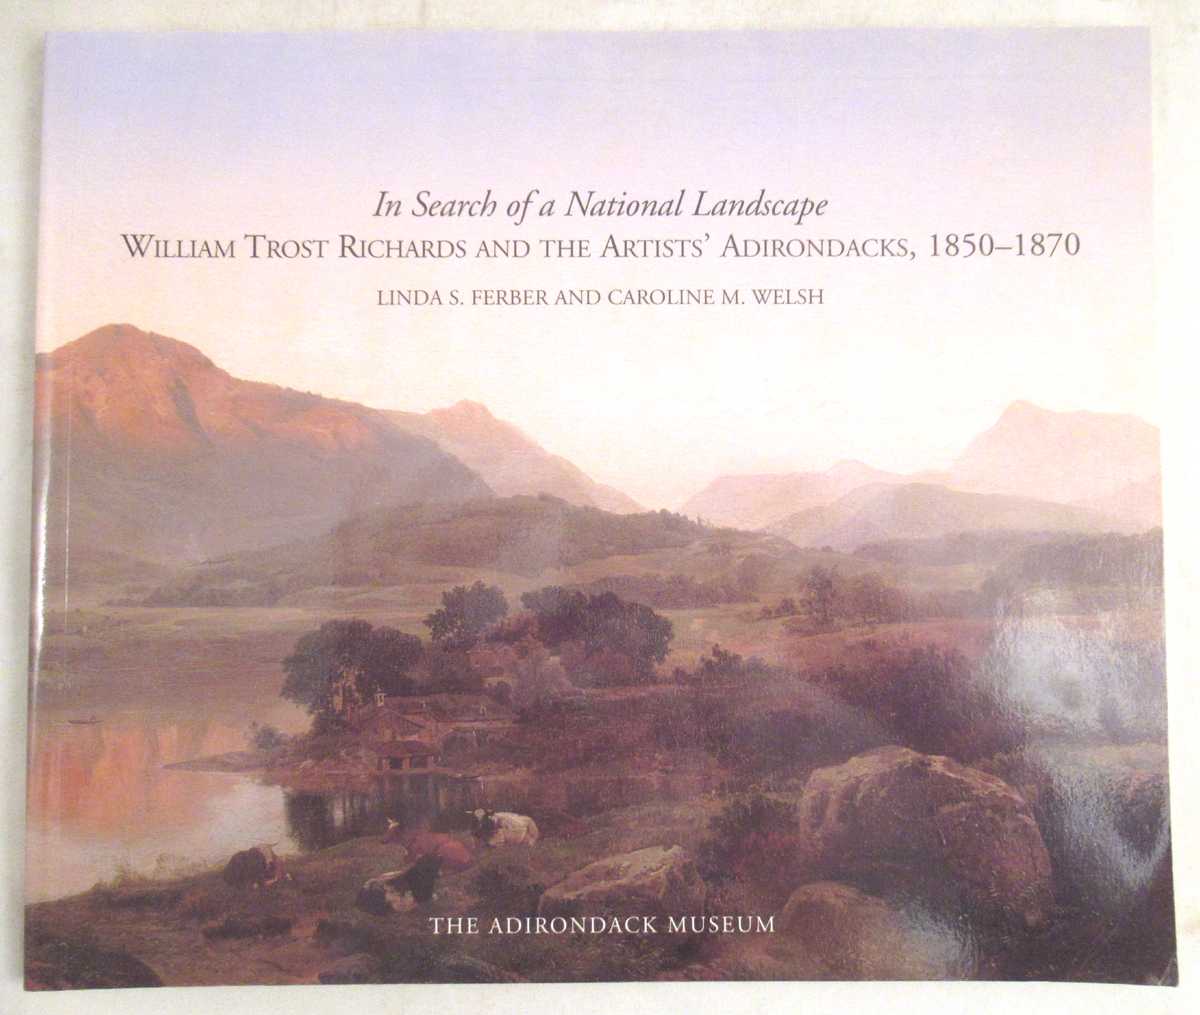 Ferber, Linda S.; Welsh, Caroline M. - In Search of a National Landscape: William Trost Richards and the Artists' Adirondacks, 1850-1870